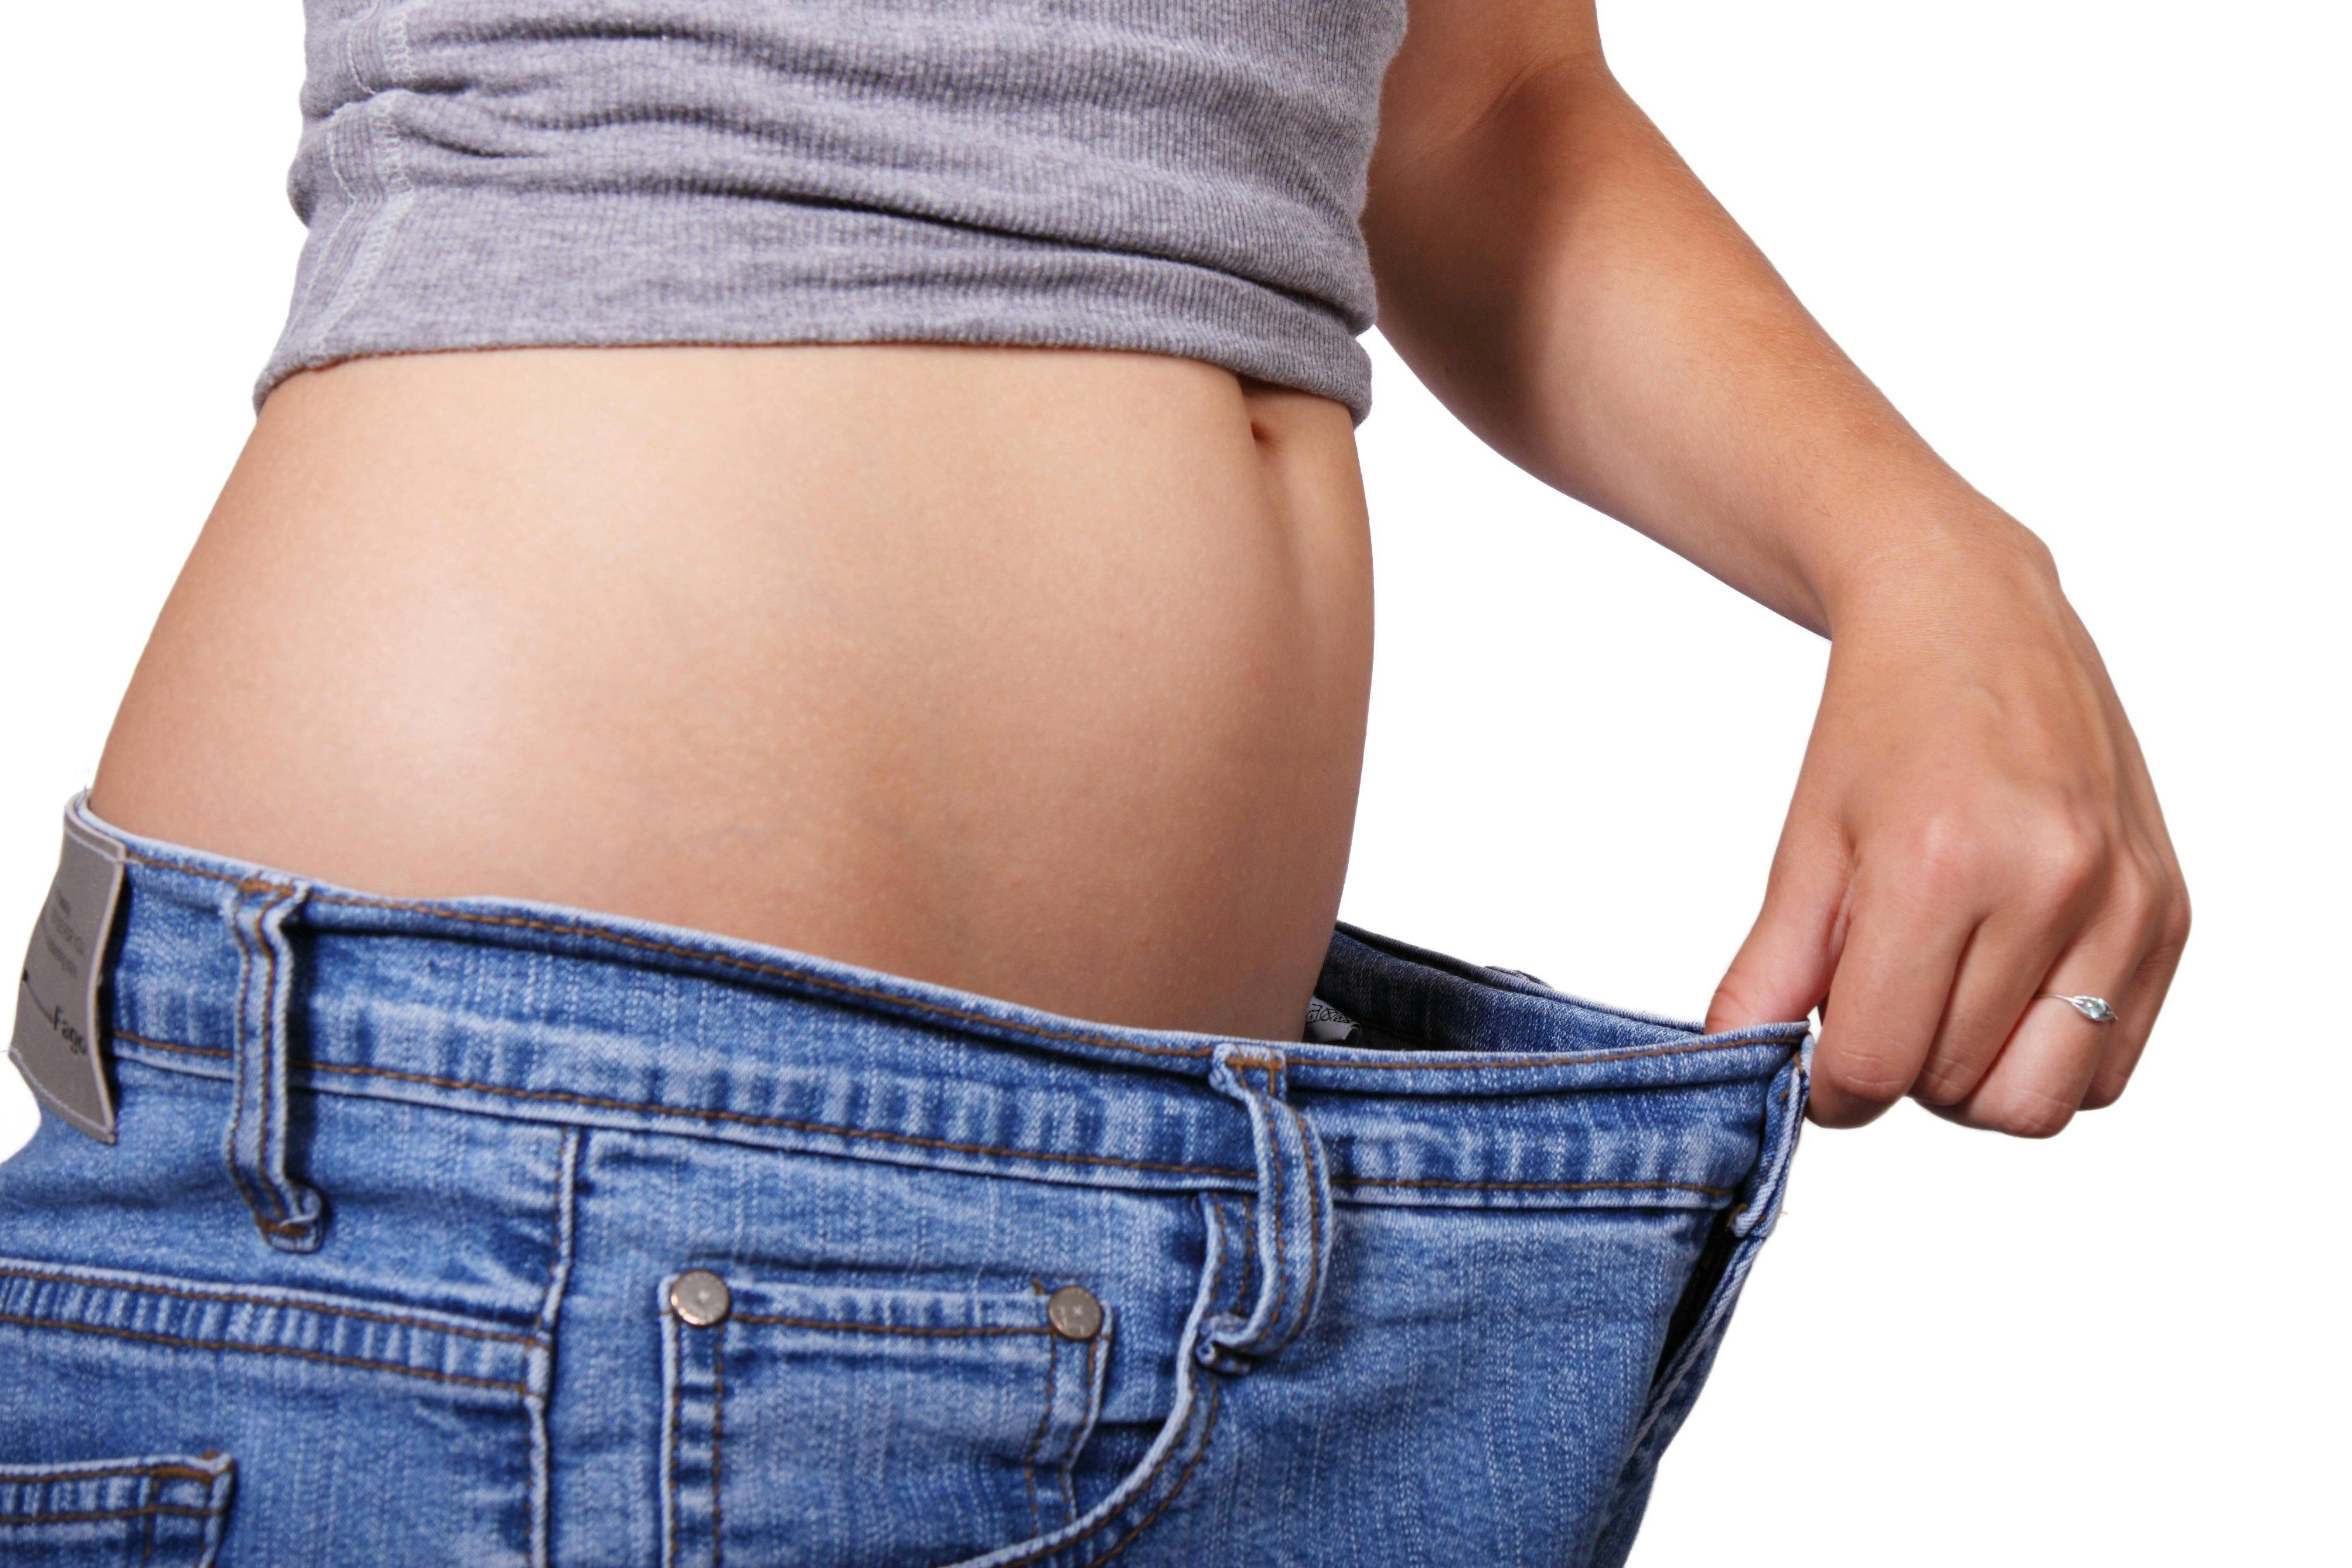 Top 11 Tricks Nobody Tells you For Losing Weight Naturally